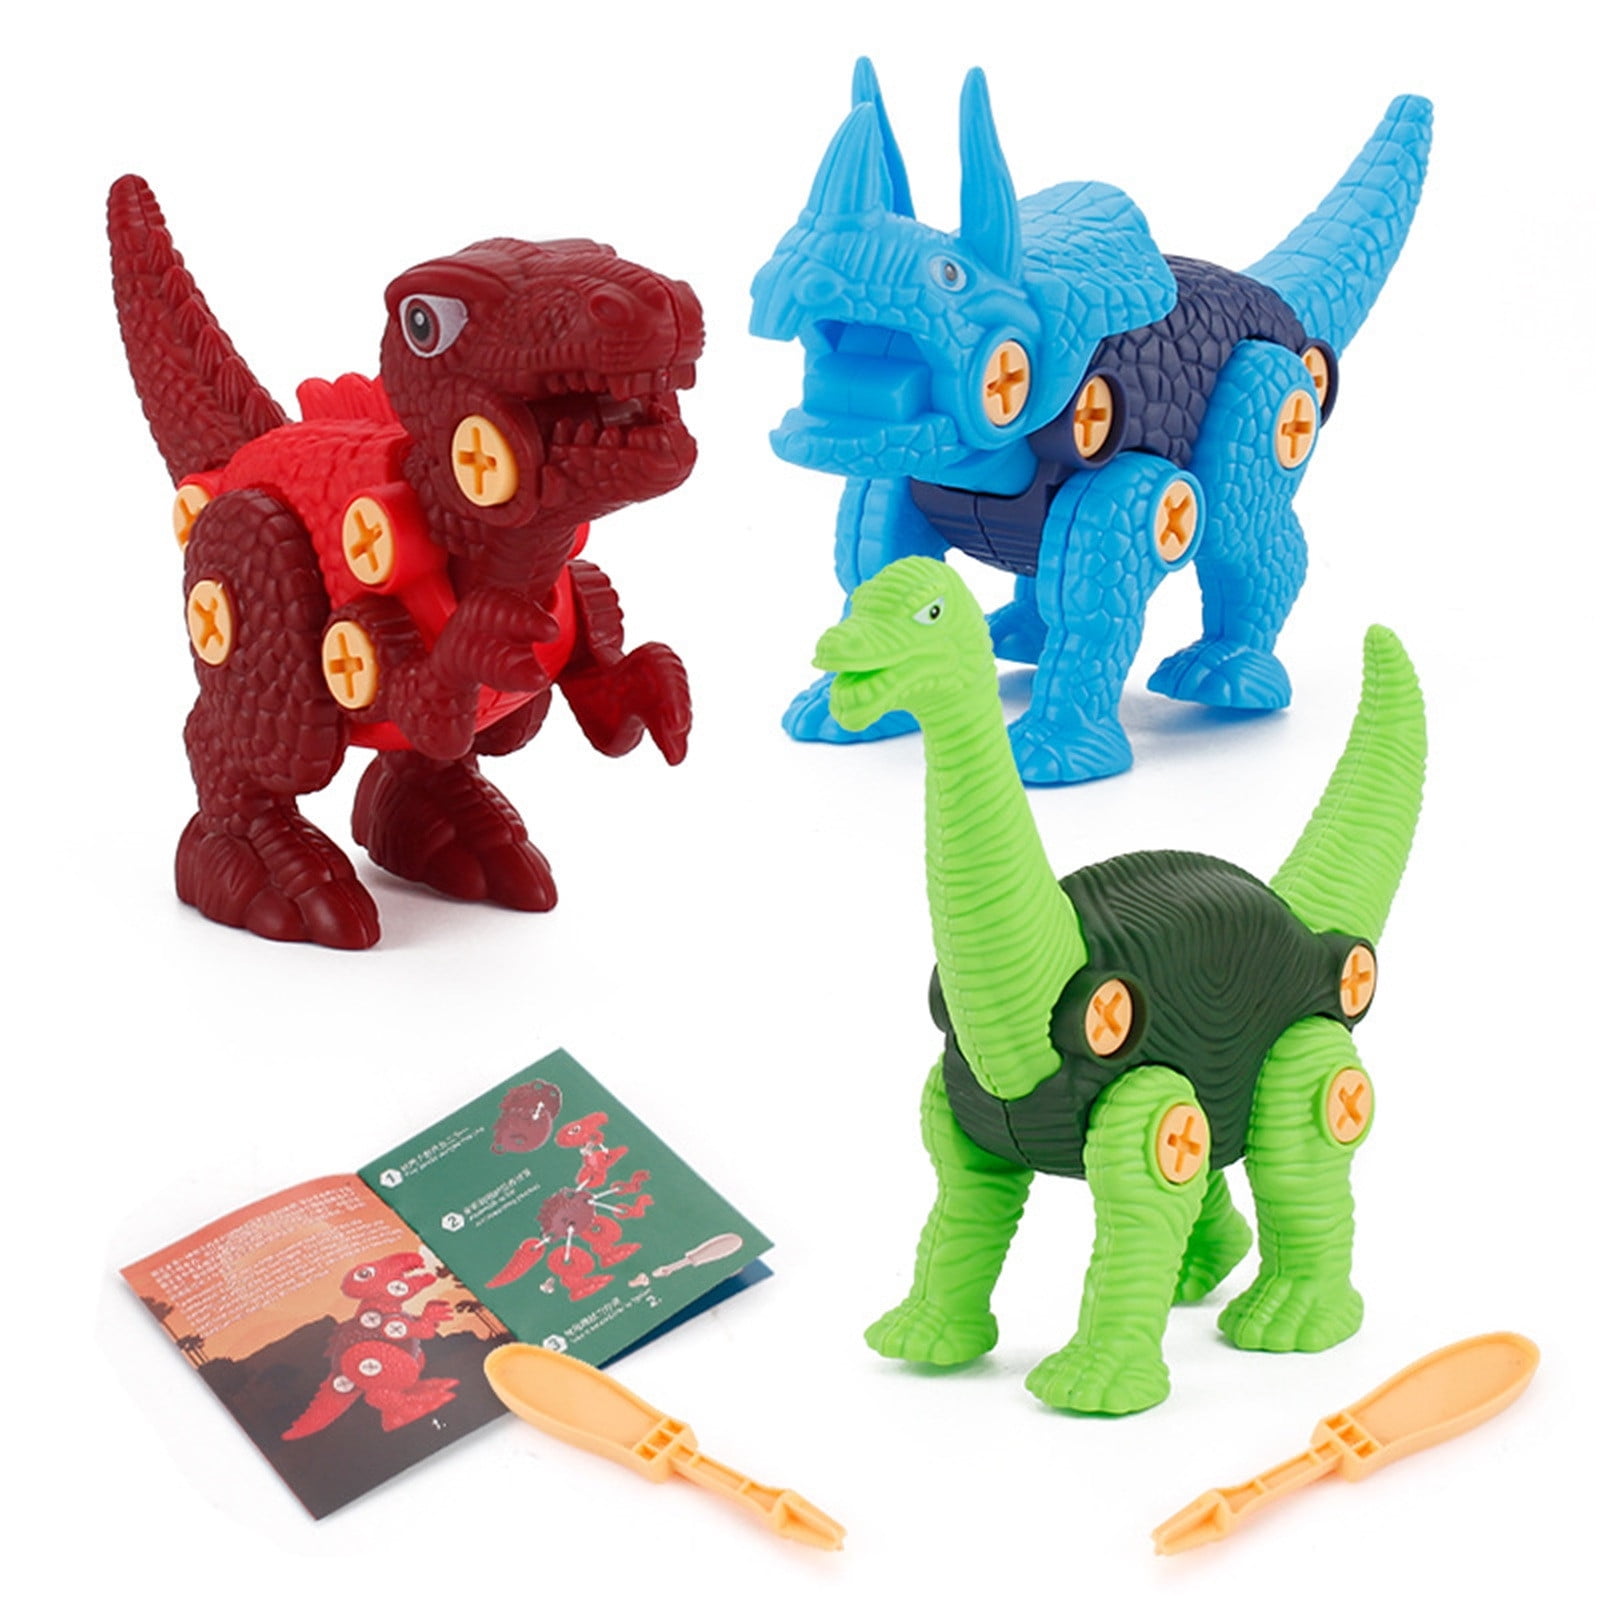 Fridja Dinosaur Toys, Take Apart Toys with Dinosaur Eggs,STEM Building  Learning Toy Set for Kids 3 4 5 6 7 Years Old Girls Boys Easter Christmas  Birthday Gifts 